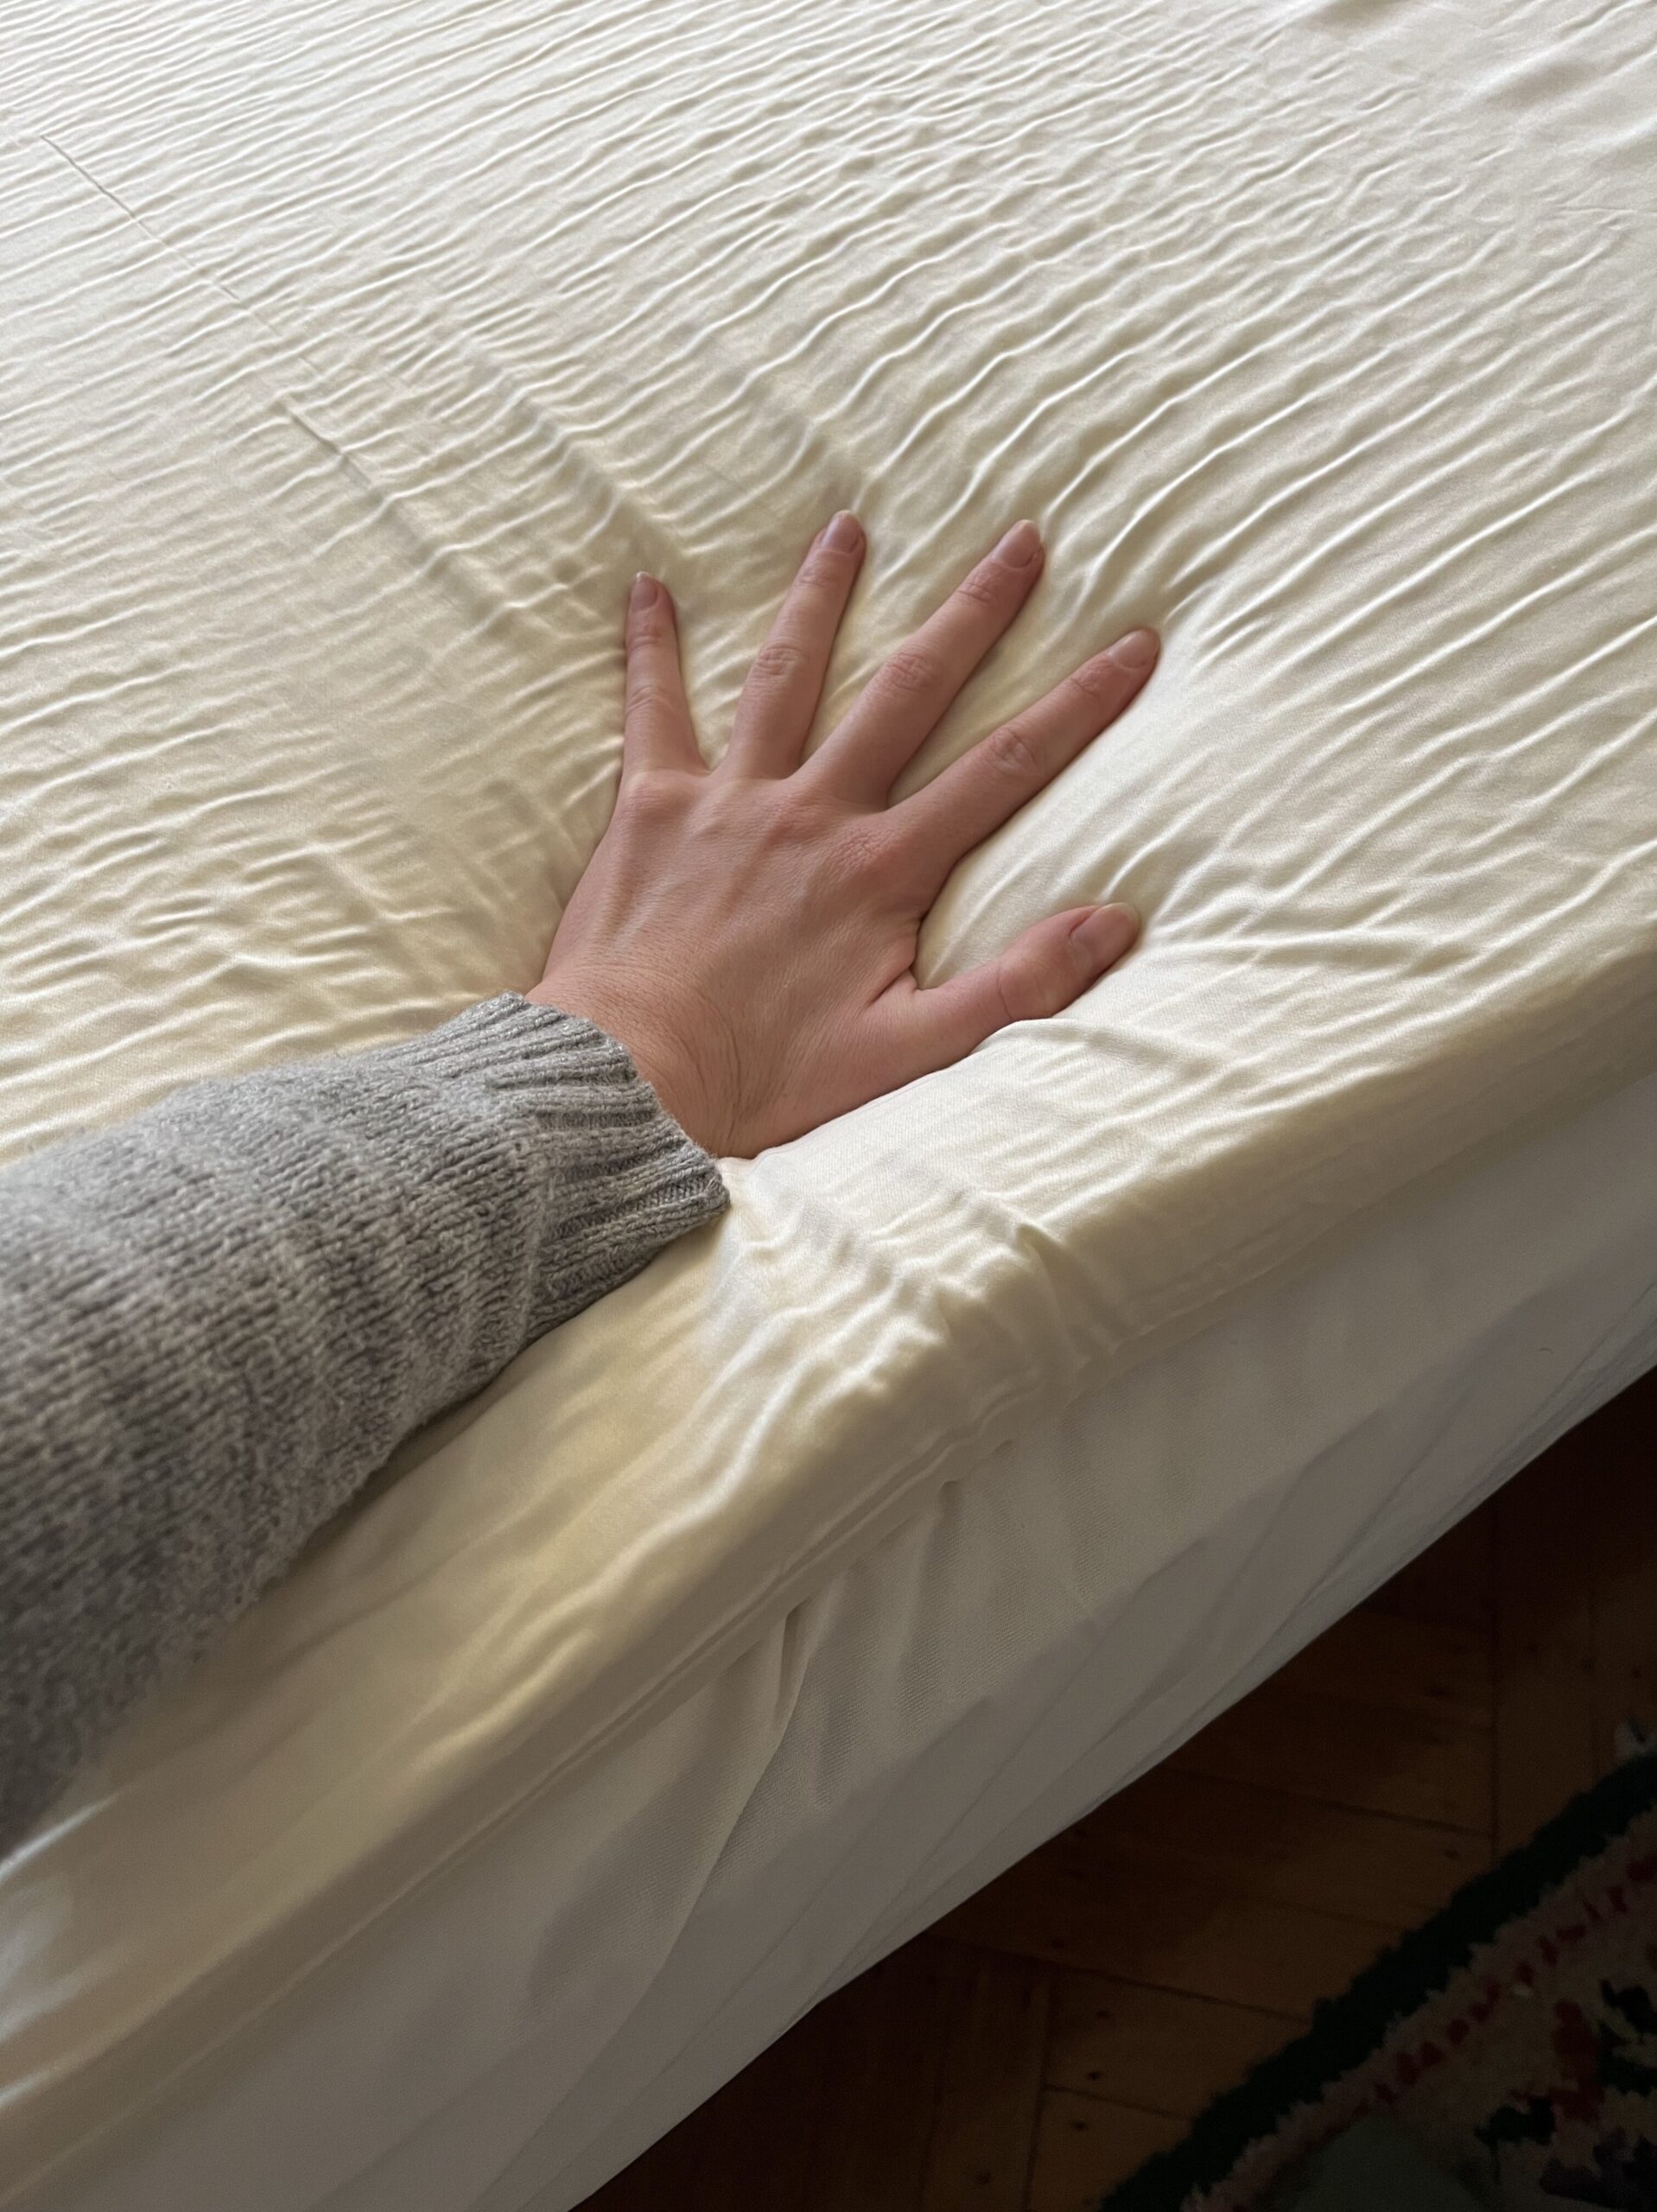 Our editor testing the mattress topper from Silk & Snow